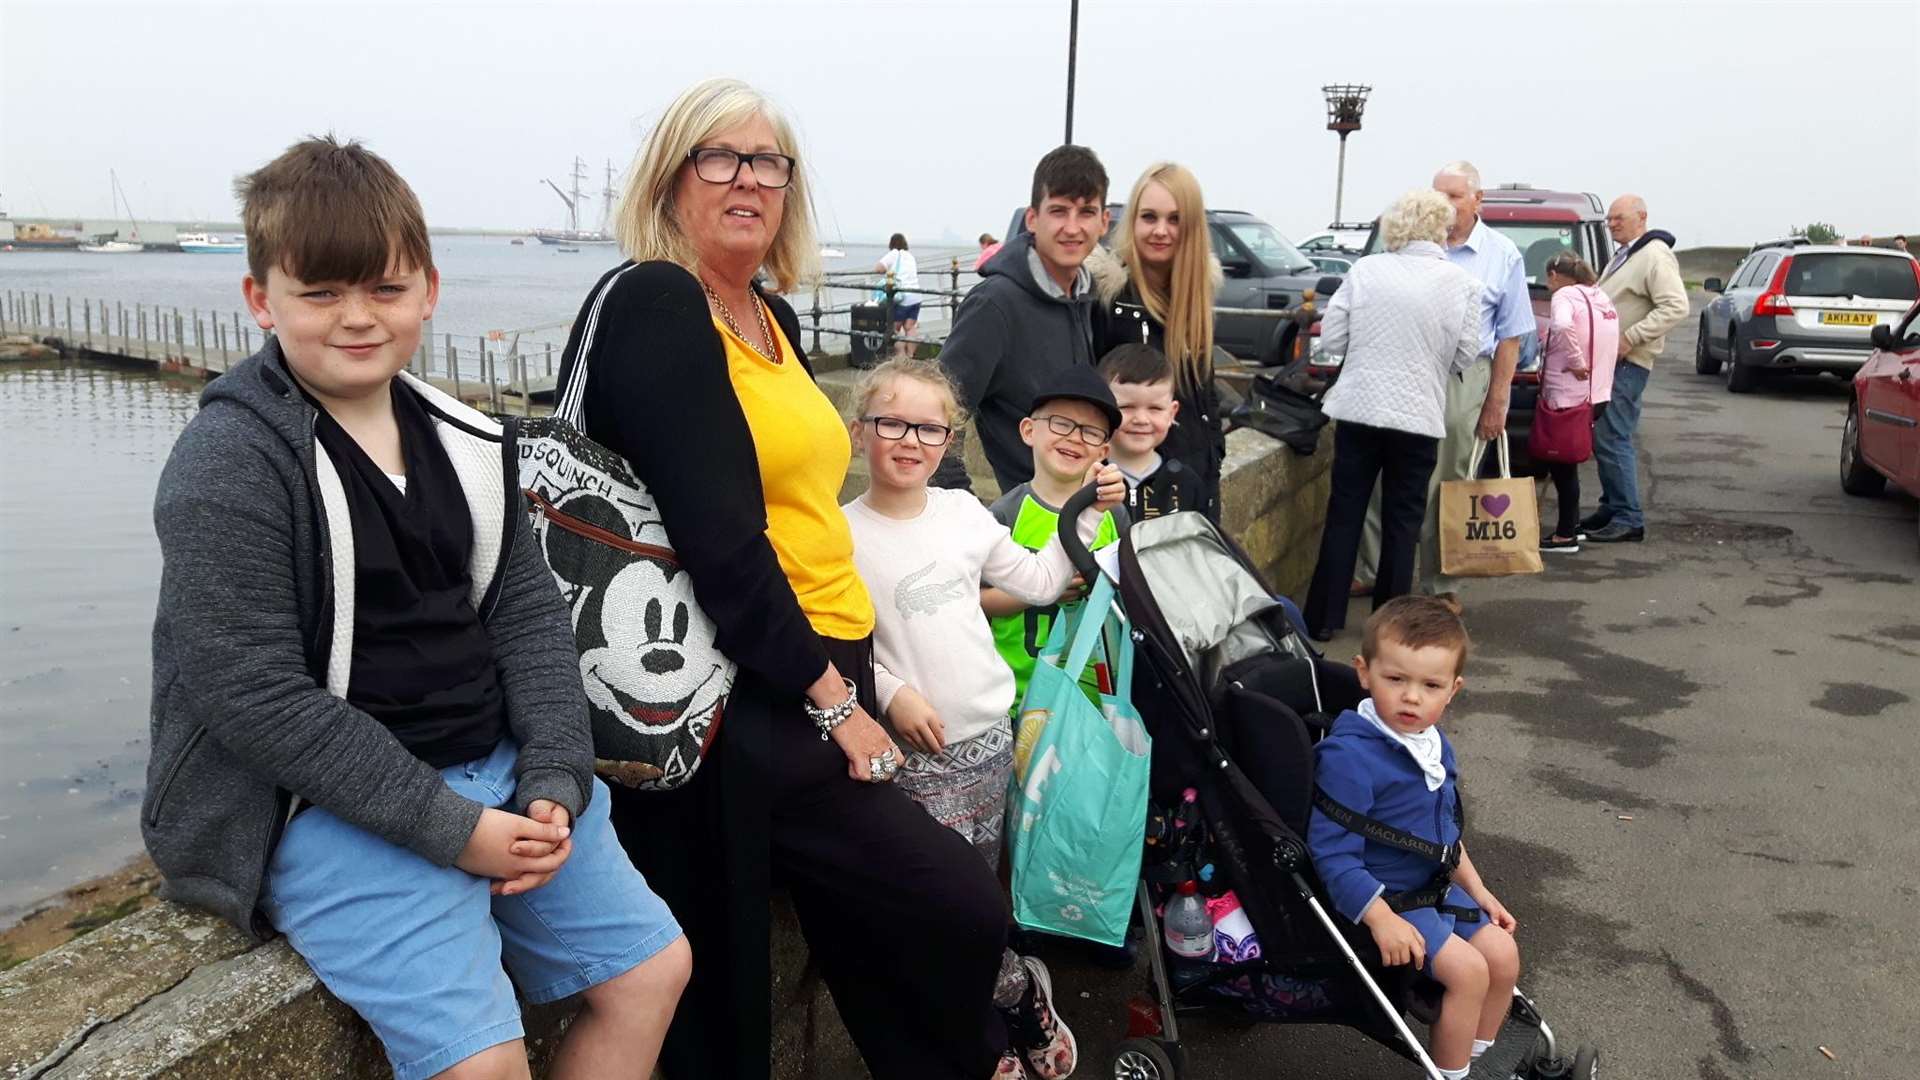 Tracey Weedon and family waiting at Queenborough for the maiden voyage of the Sheppey to Southend ferry